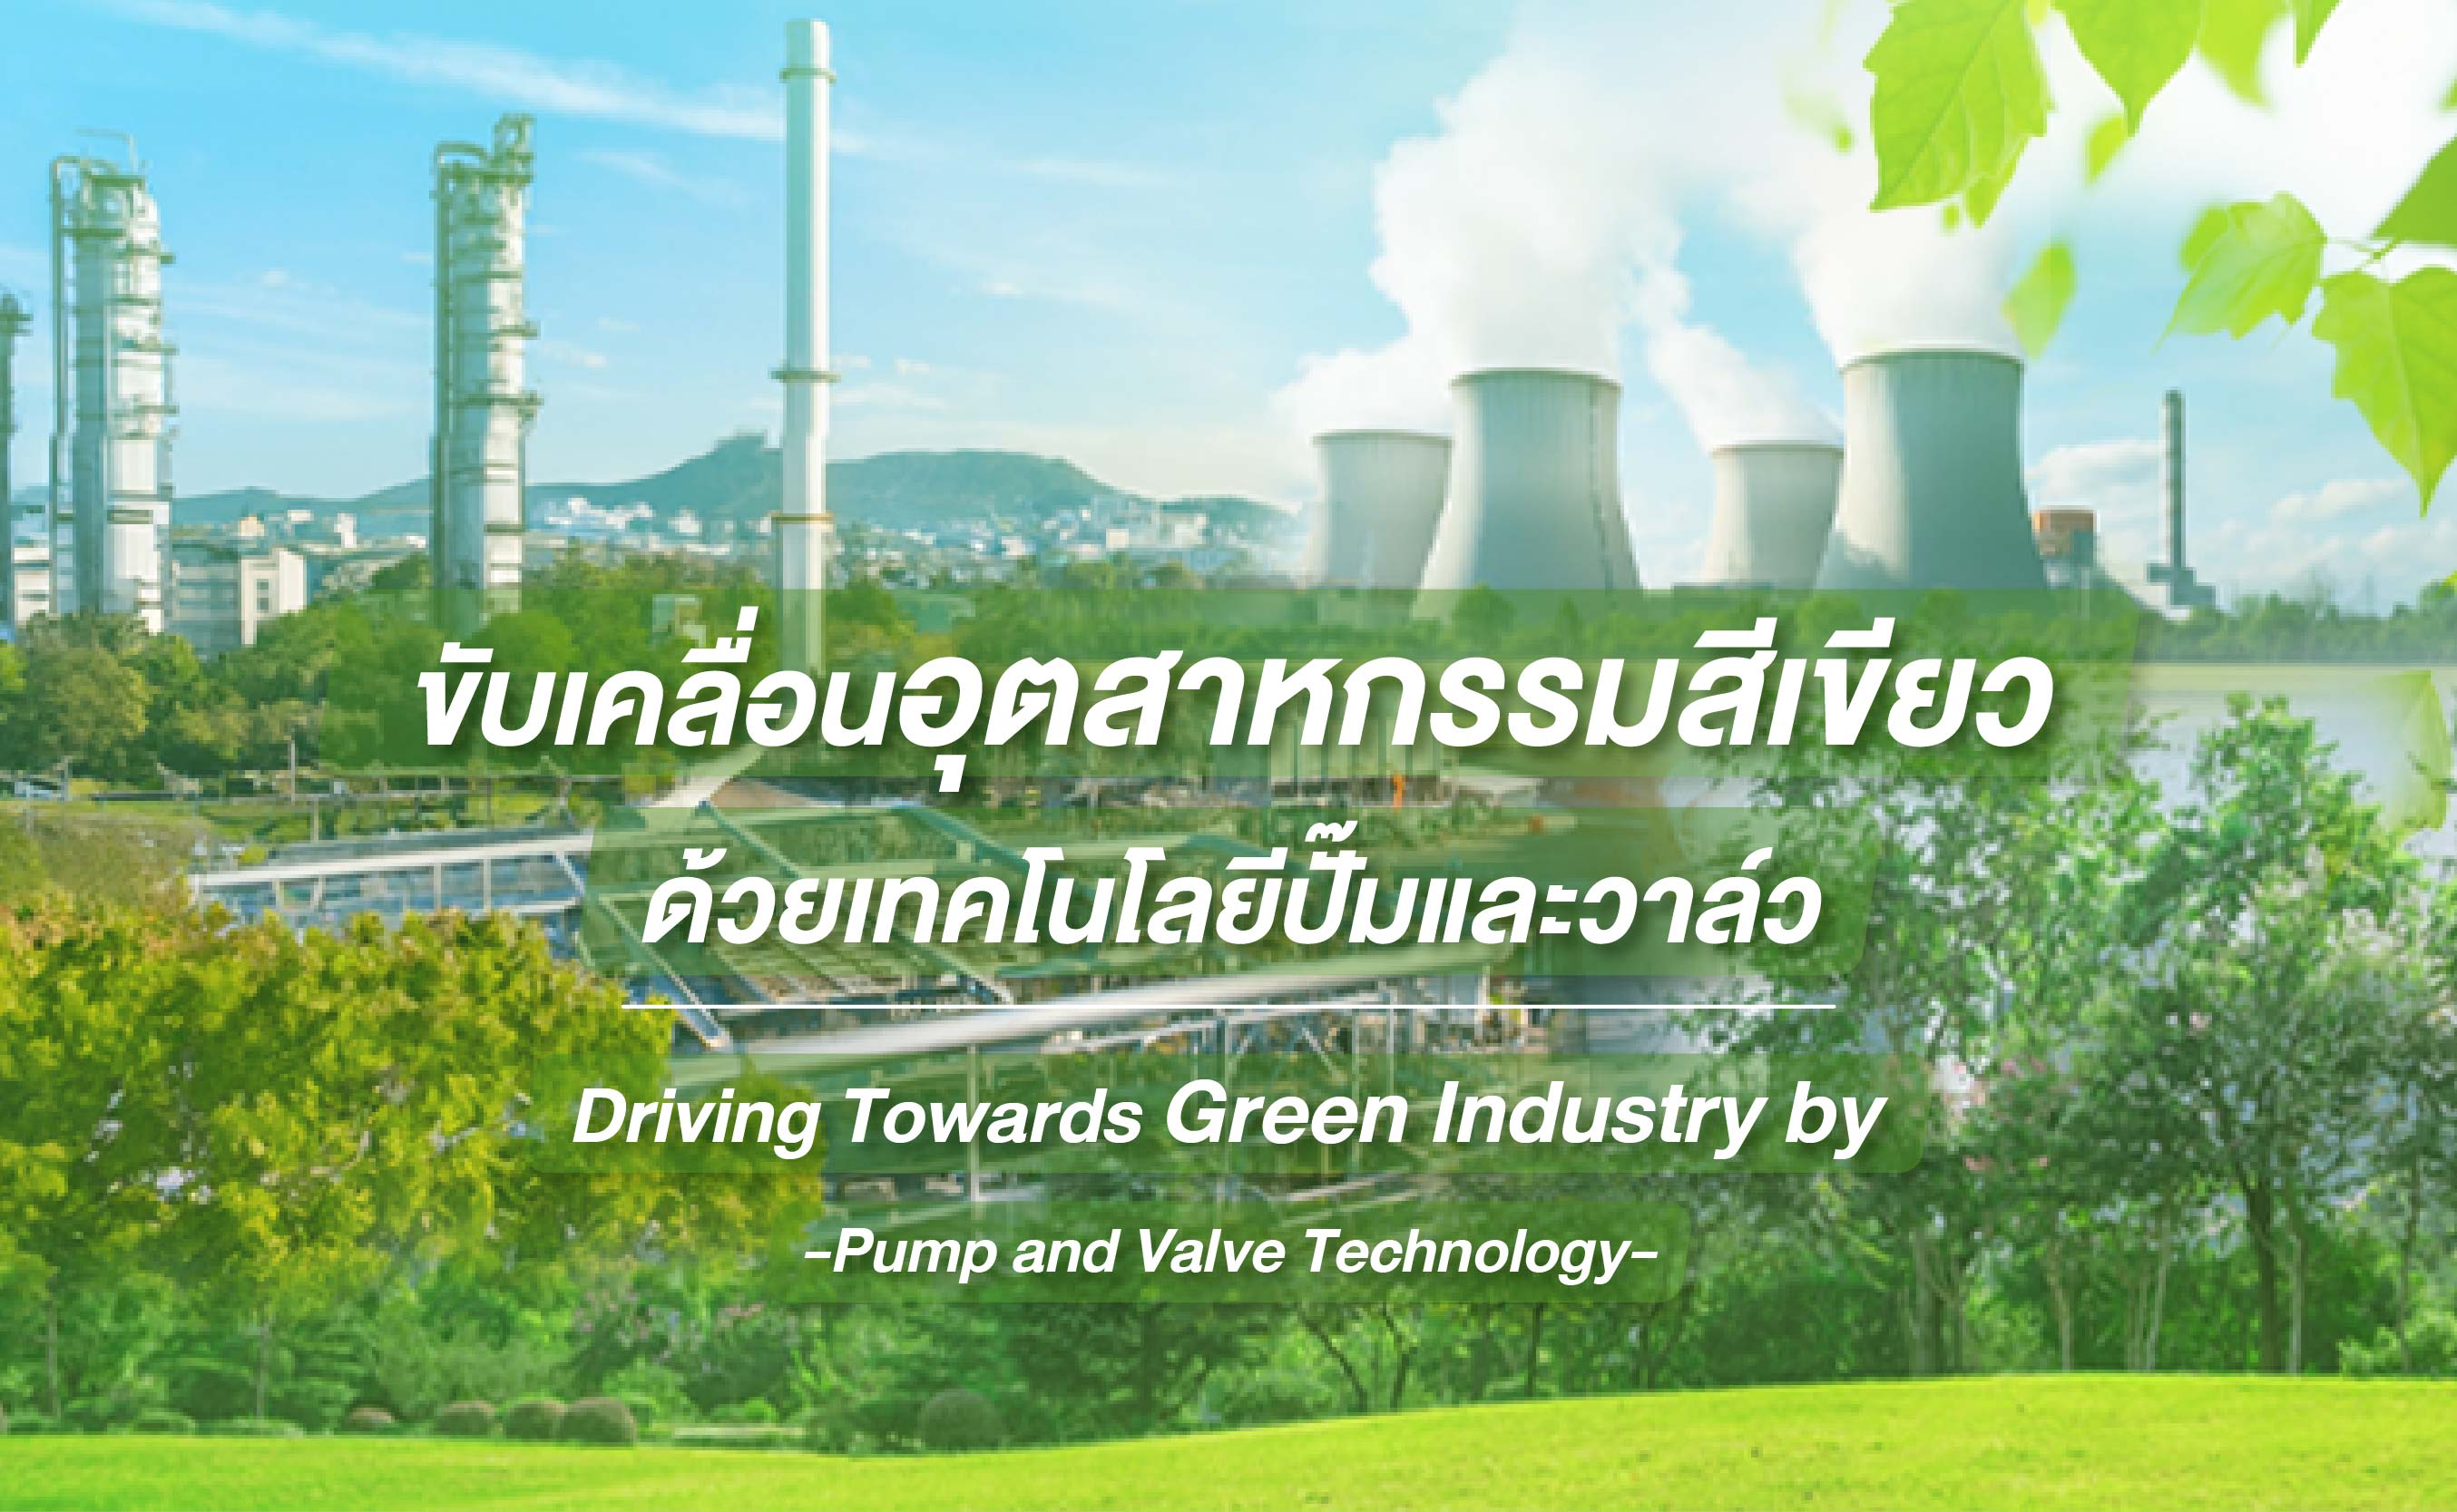 Driving Green Industry with Pump and Valve Technology